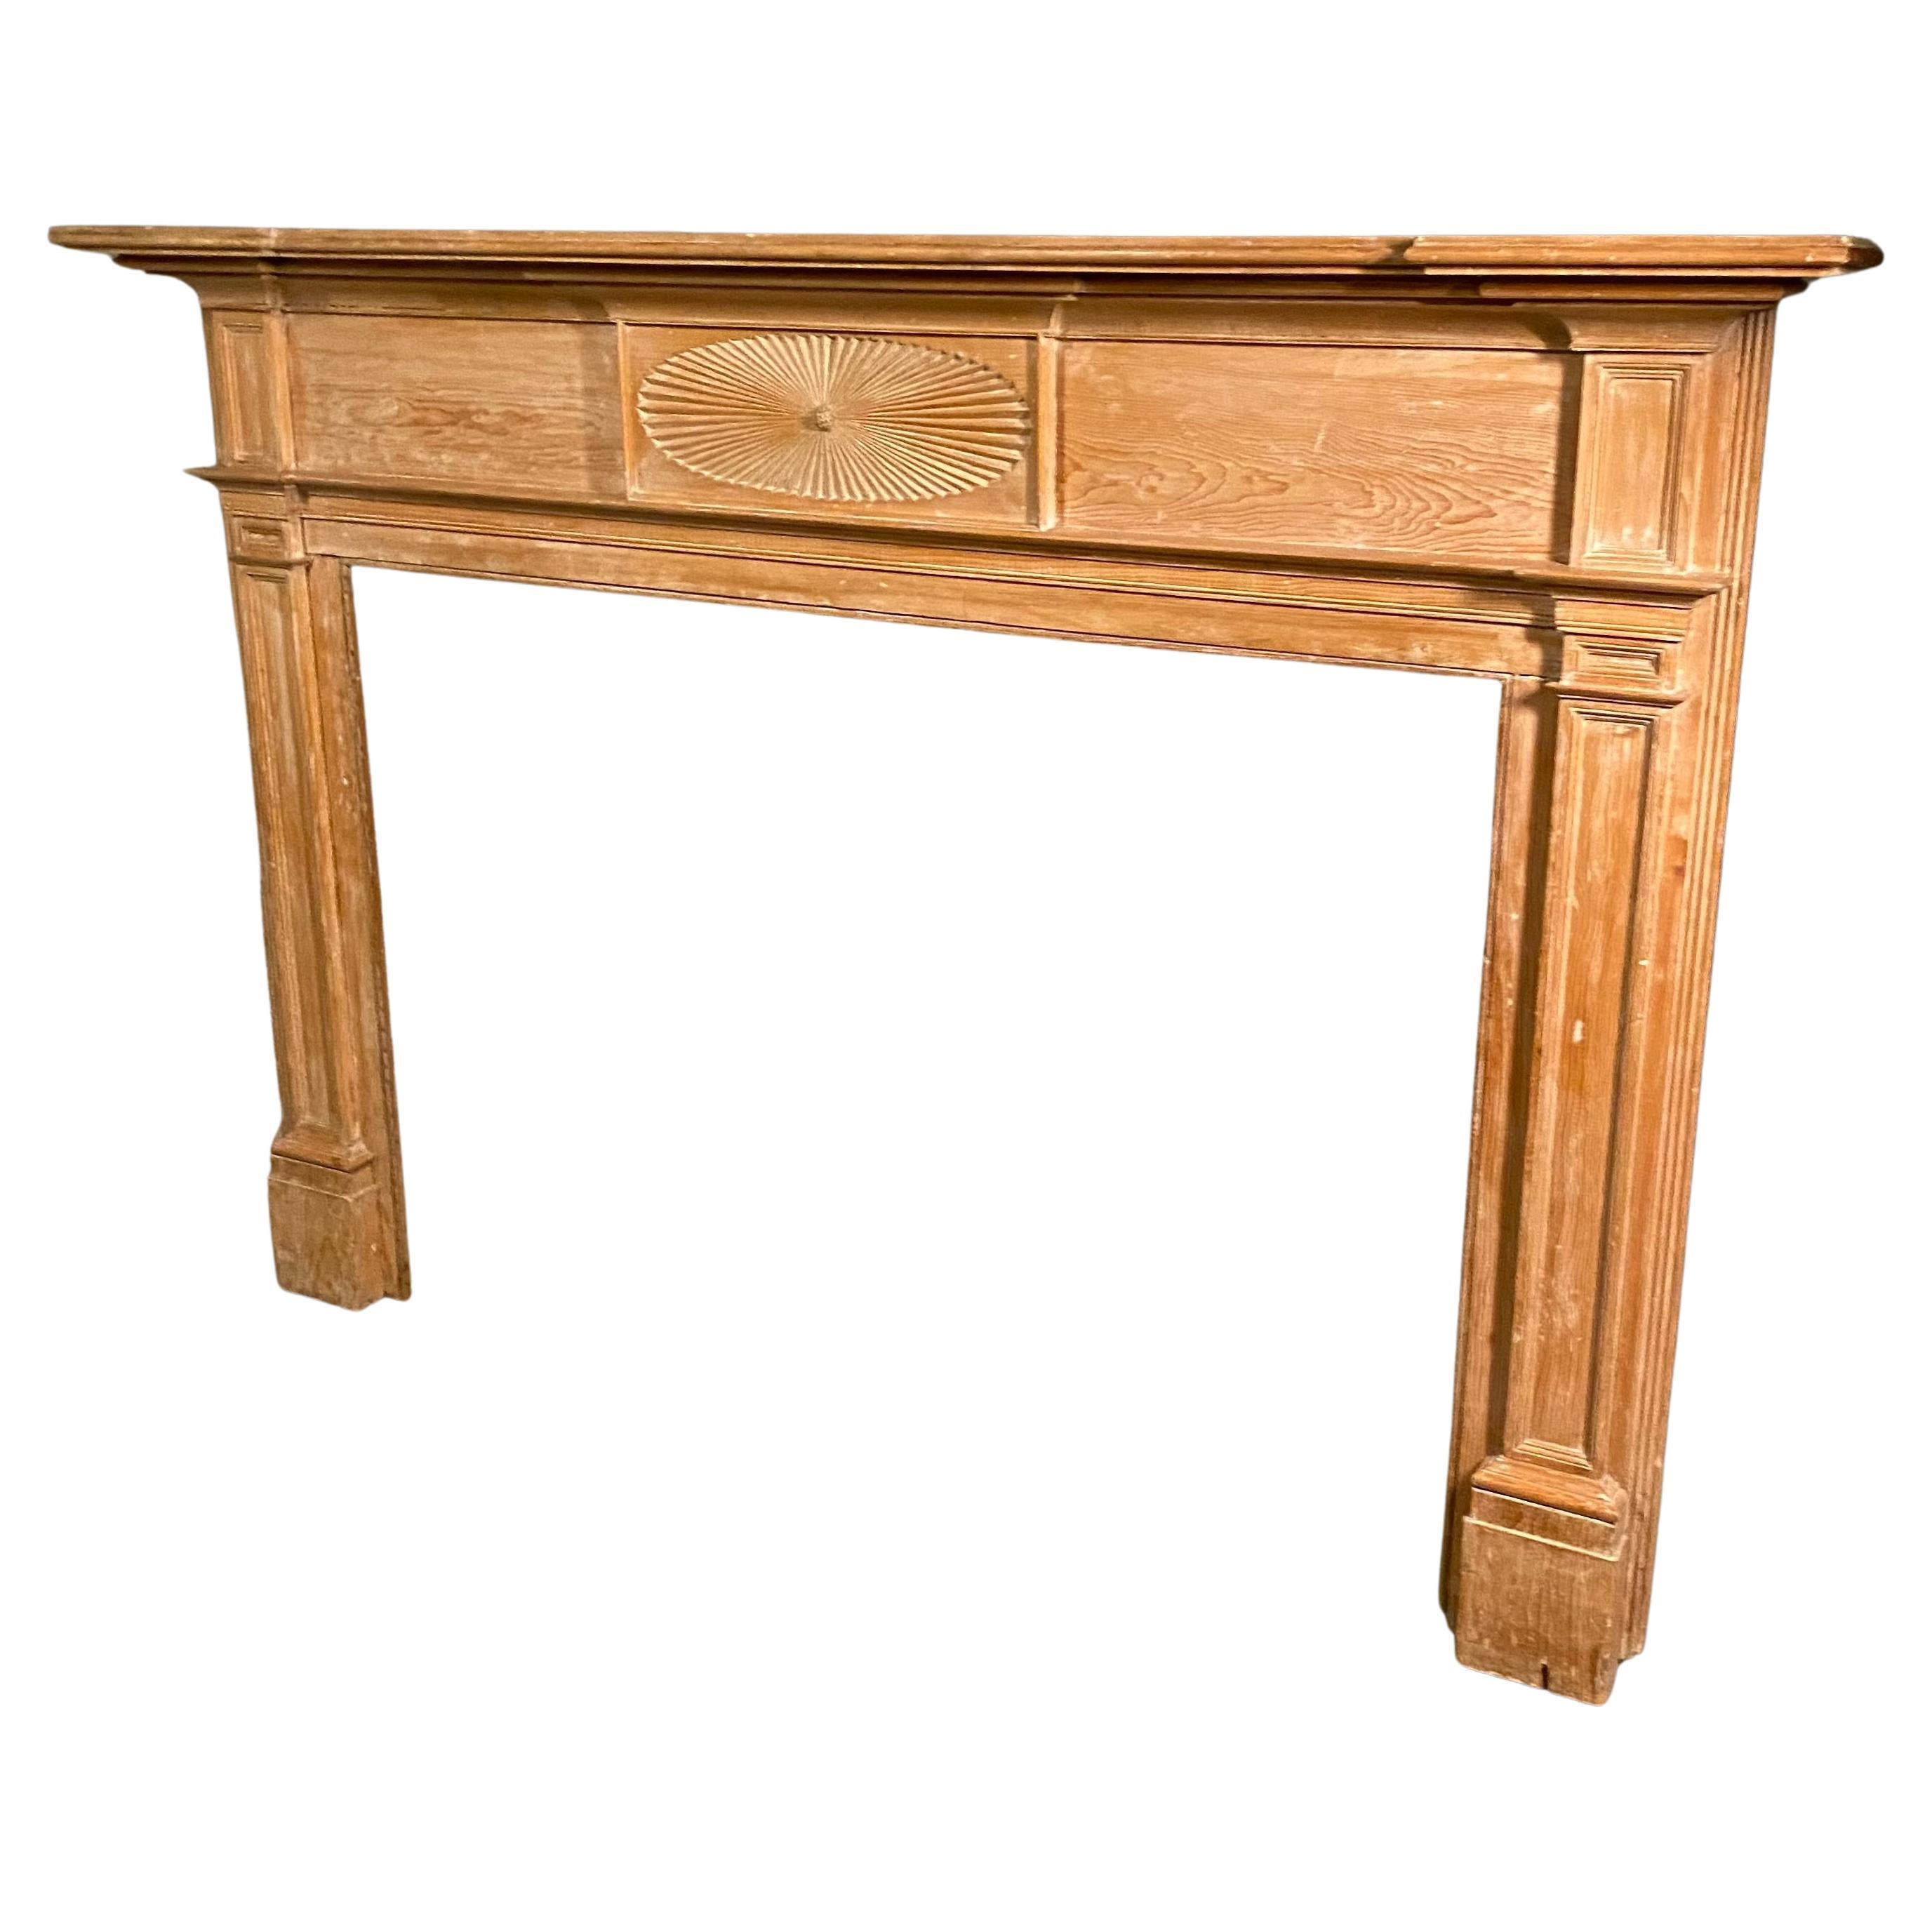 1820 American Federal Pine Fireplace Mantle